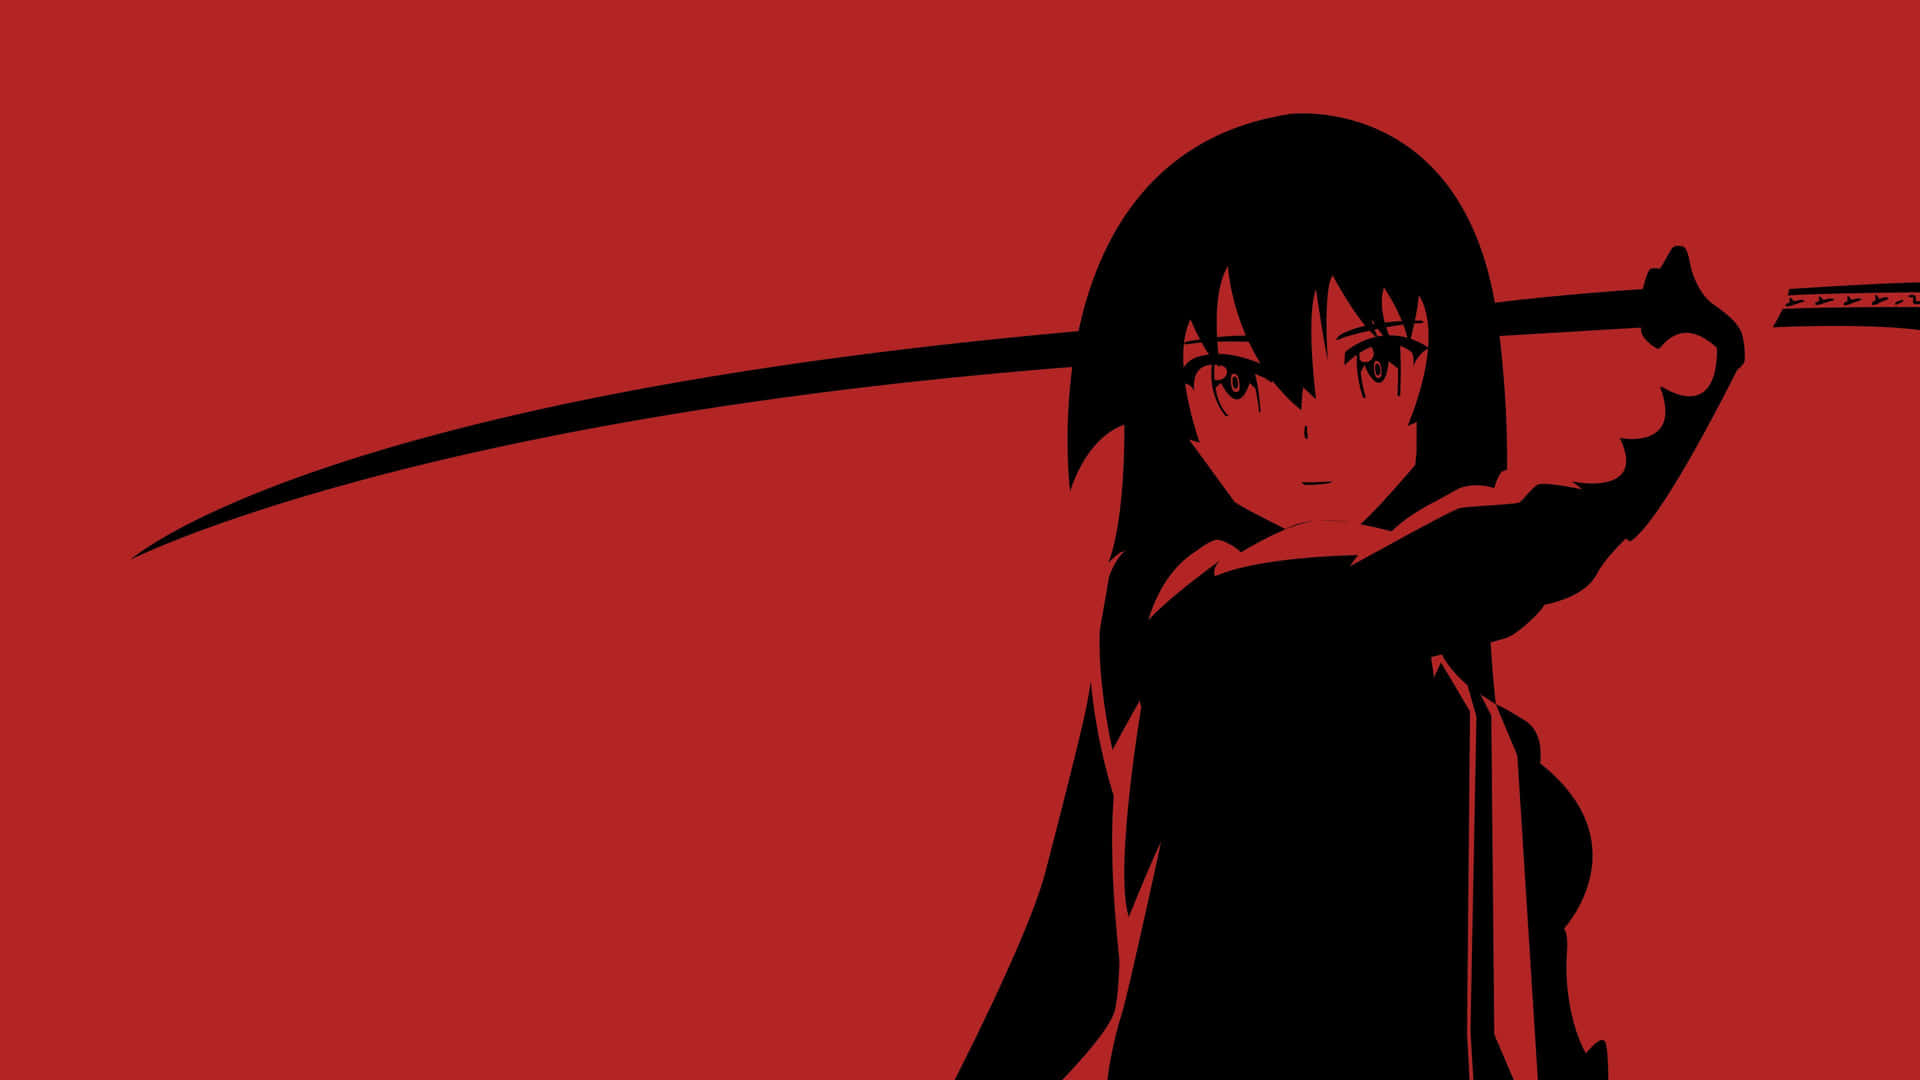 Anime illustration featuring striking red and black colors Wallpaper